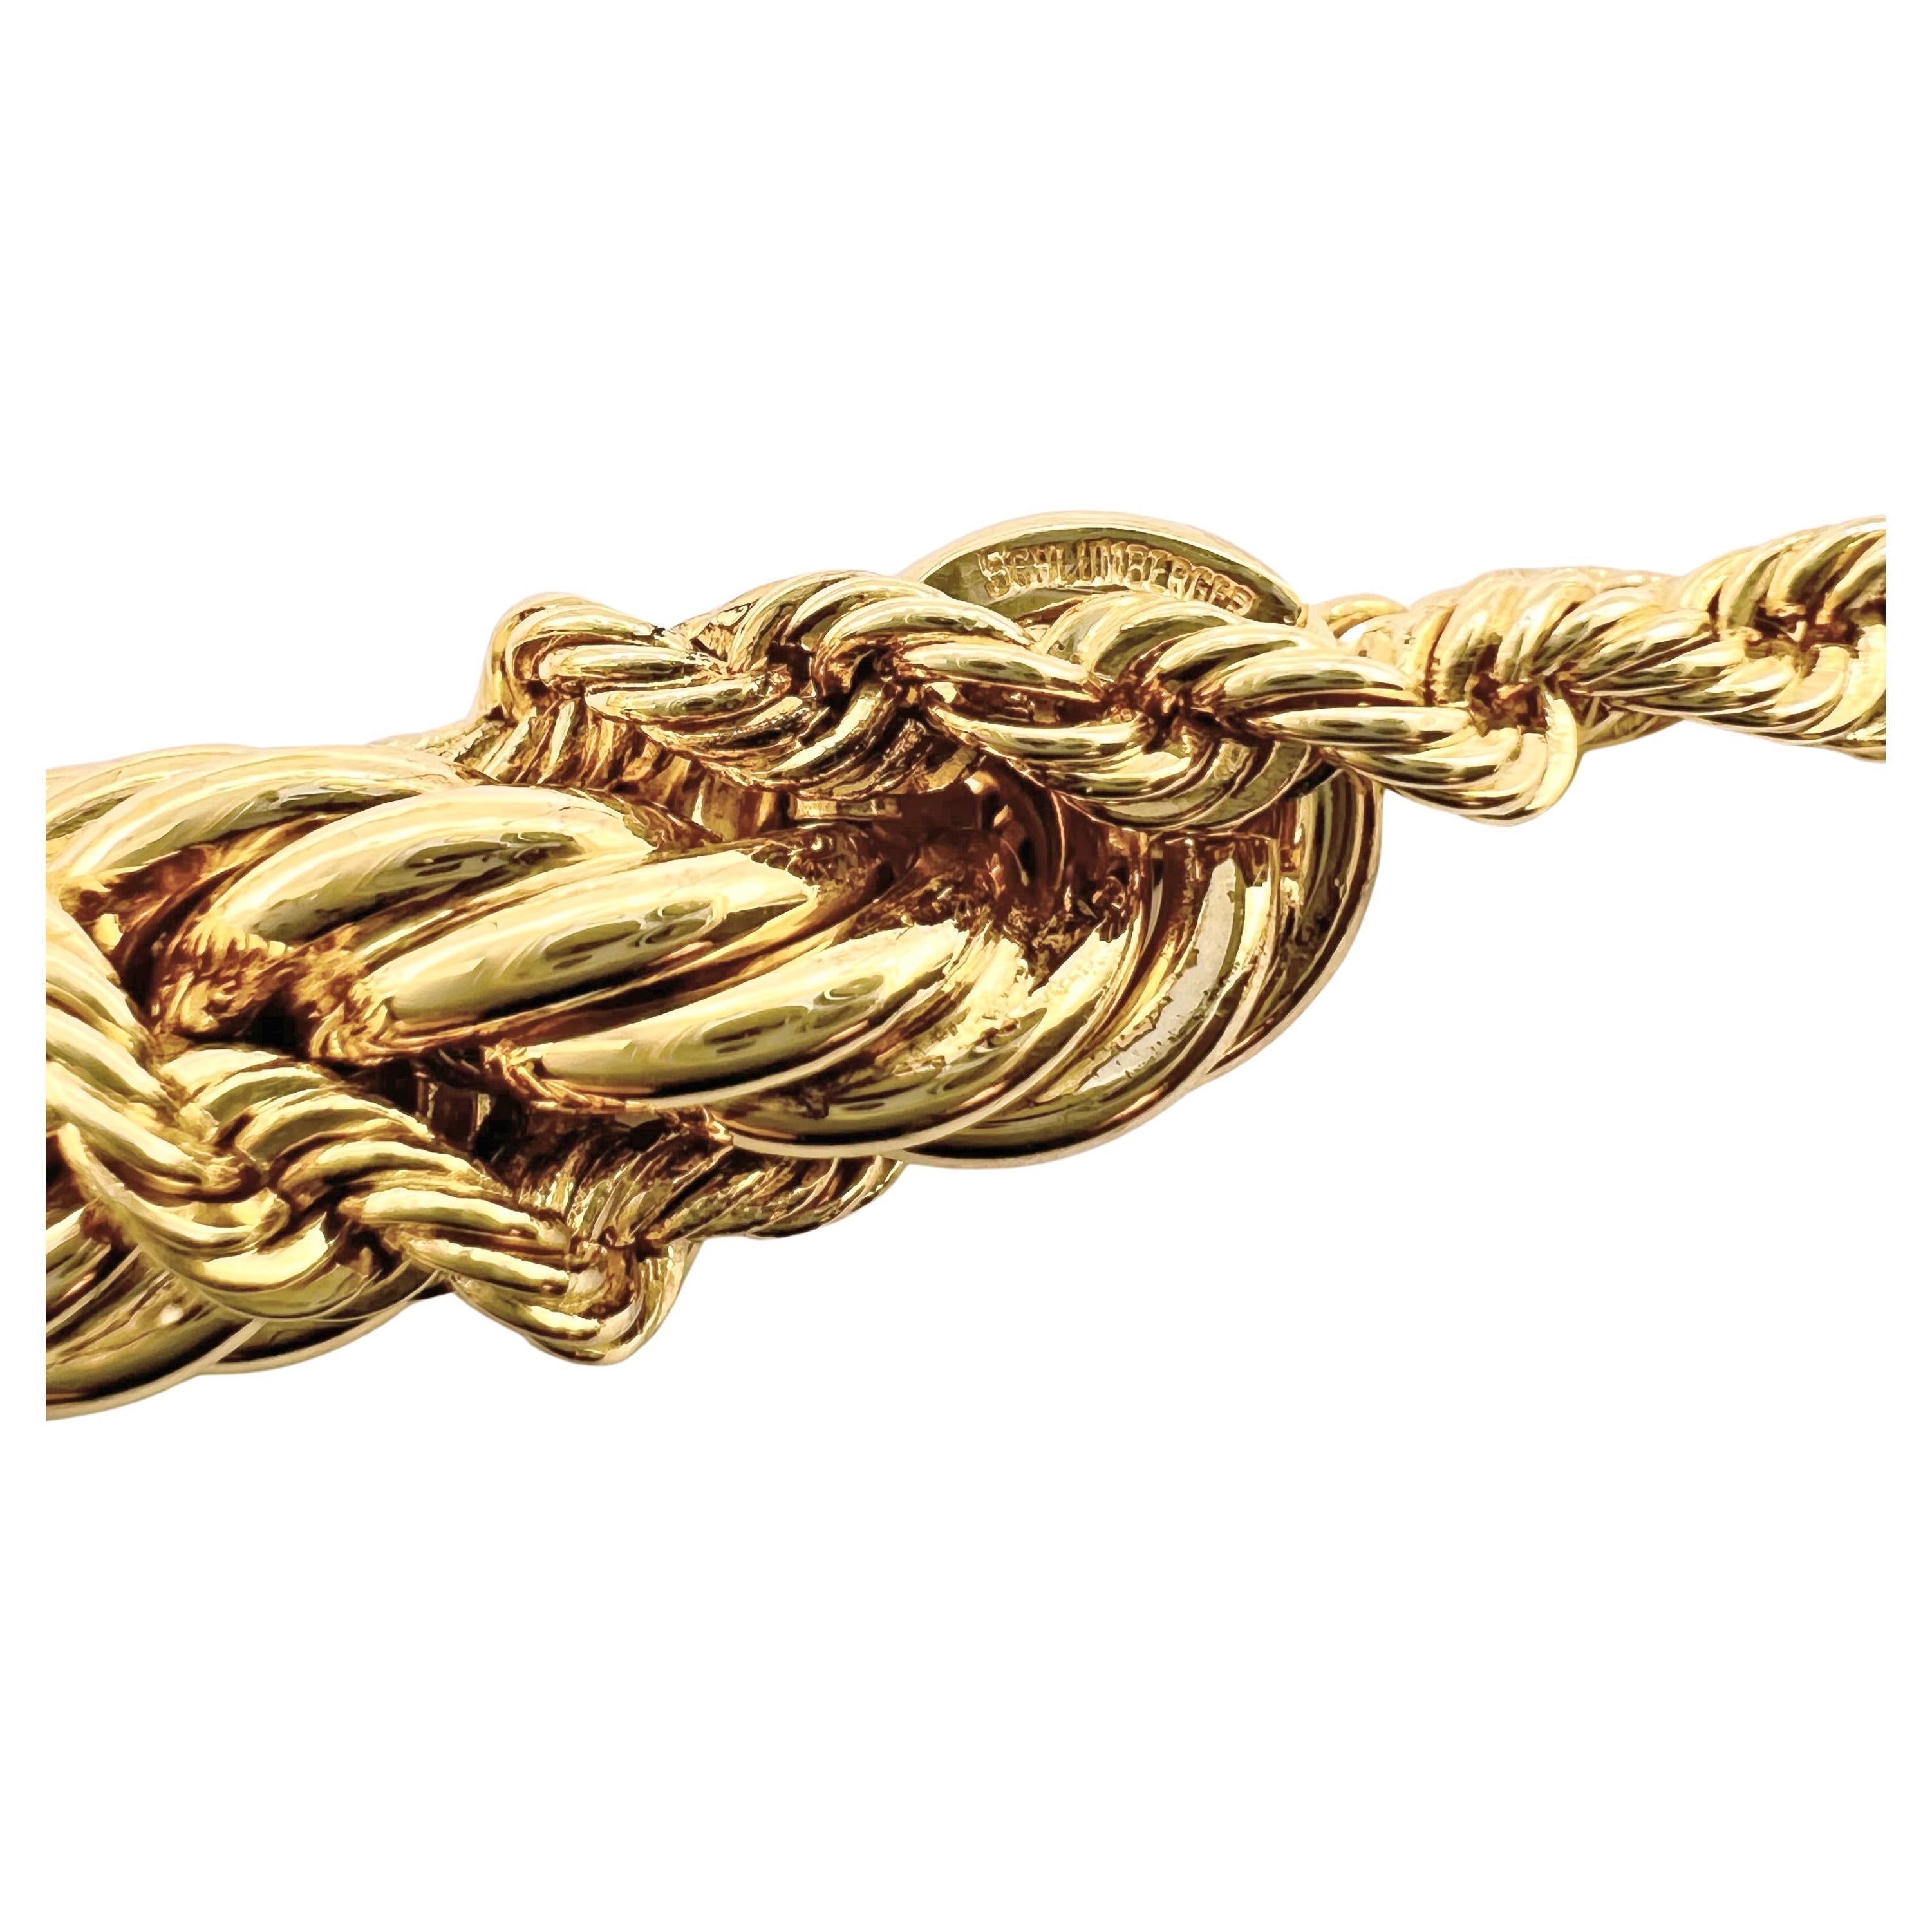 Heavyweight rope-twist chain bracelet in 18k yellow gold, designed by Jean Schlumberger for Tiffany & Co. Comprised of a larger 8.50mm polished rope chain with a smaller rope chain wrapped over in a diagonal pattern. Toggle-style clasp with round